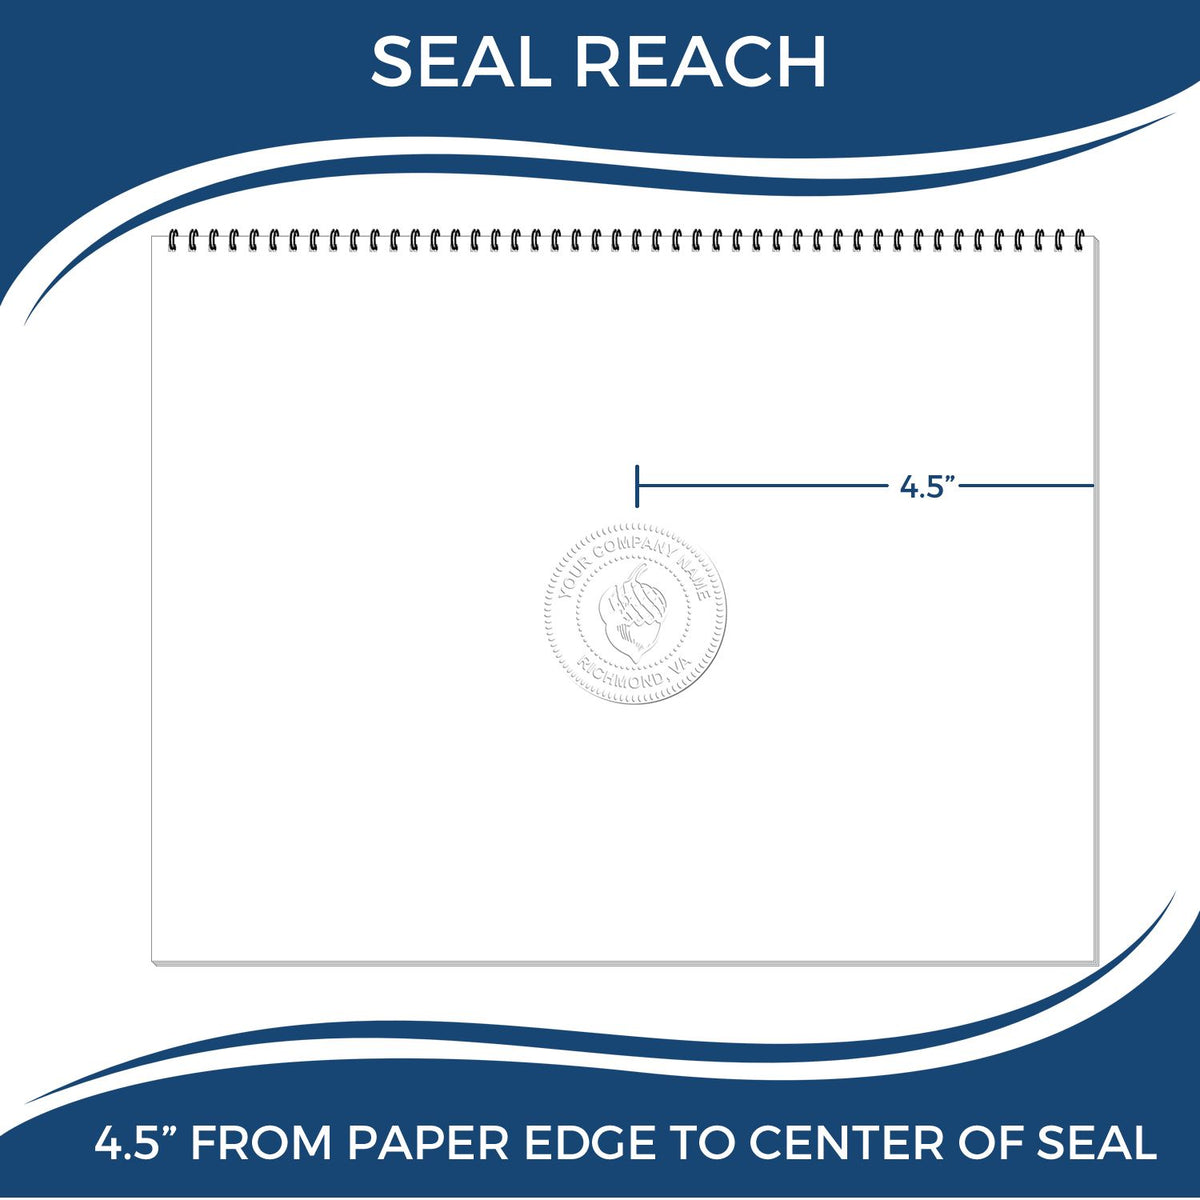 An infographic showing the seal reach which is represented by a ruler and a miniature seal image of the Extended Long Reach Delaware Surveyor Embosser